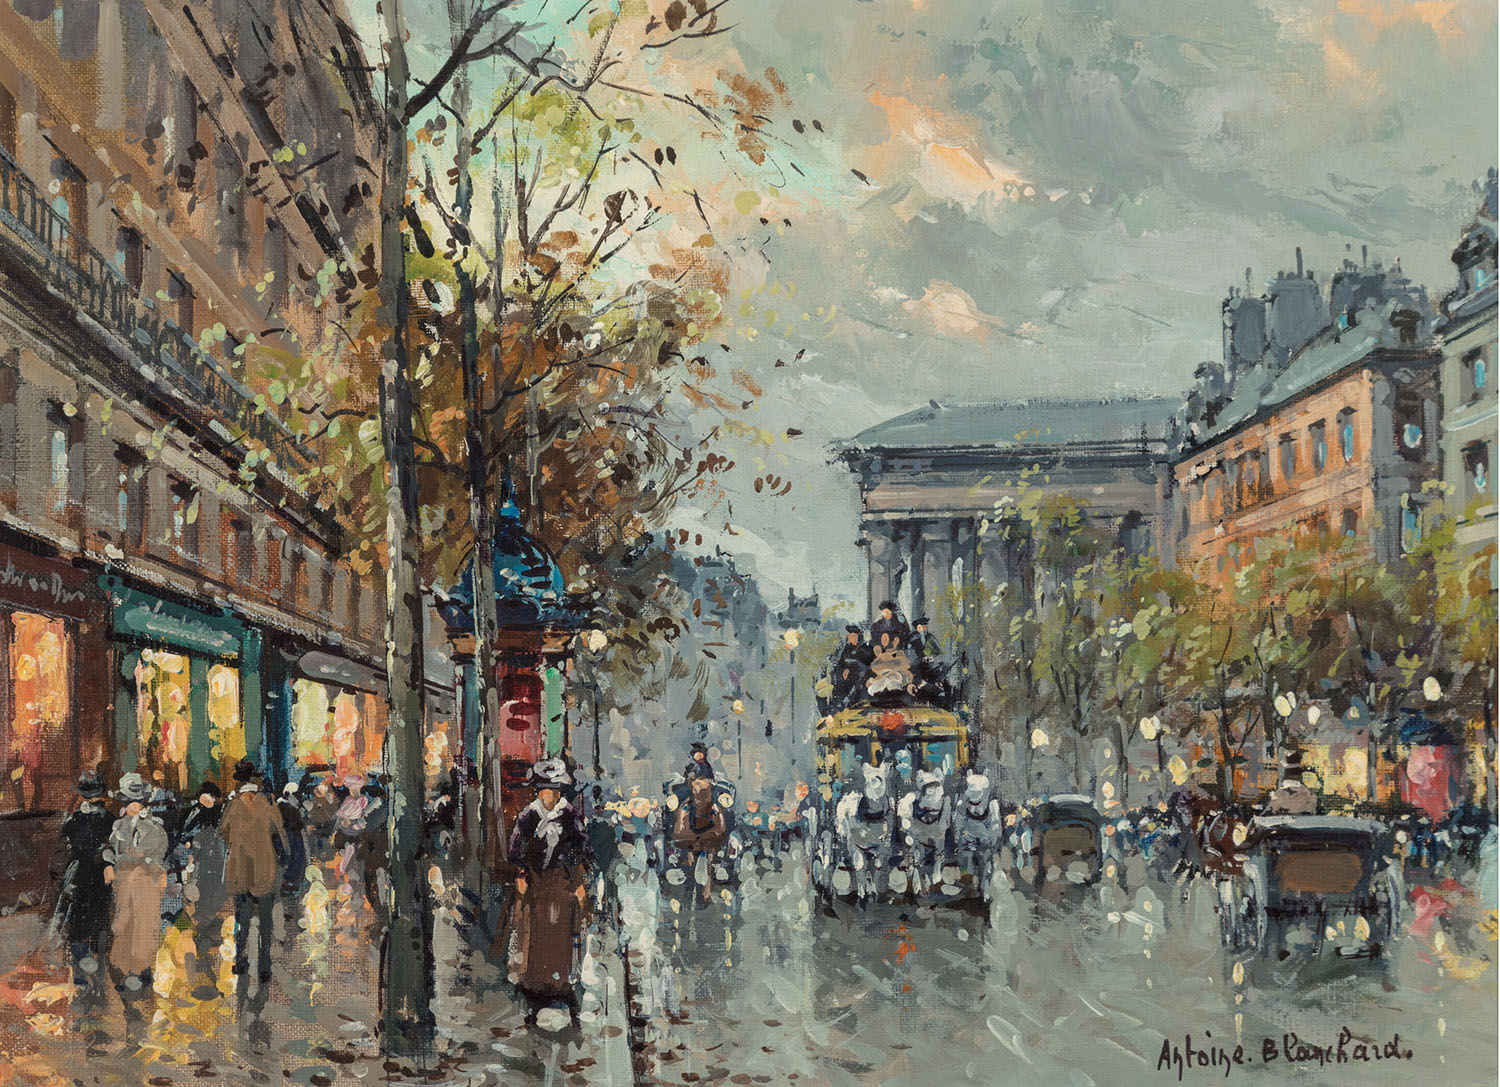 oil painting of the boulevard de la madeleine in paris with horses, carts and people walking in the street